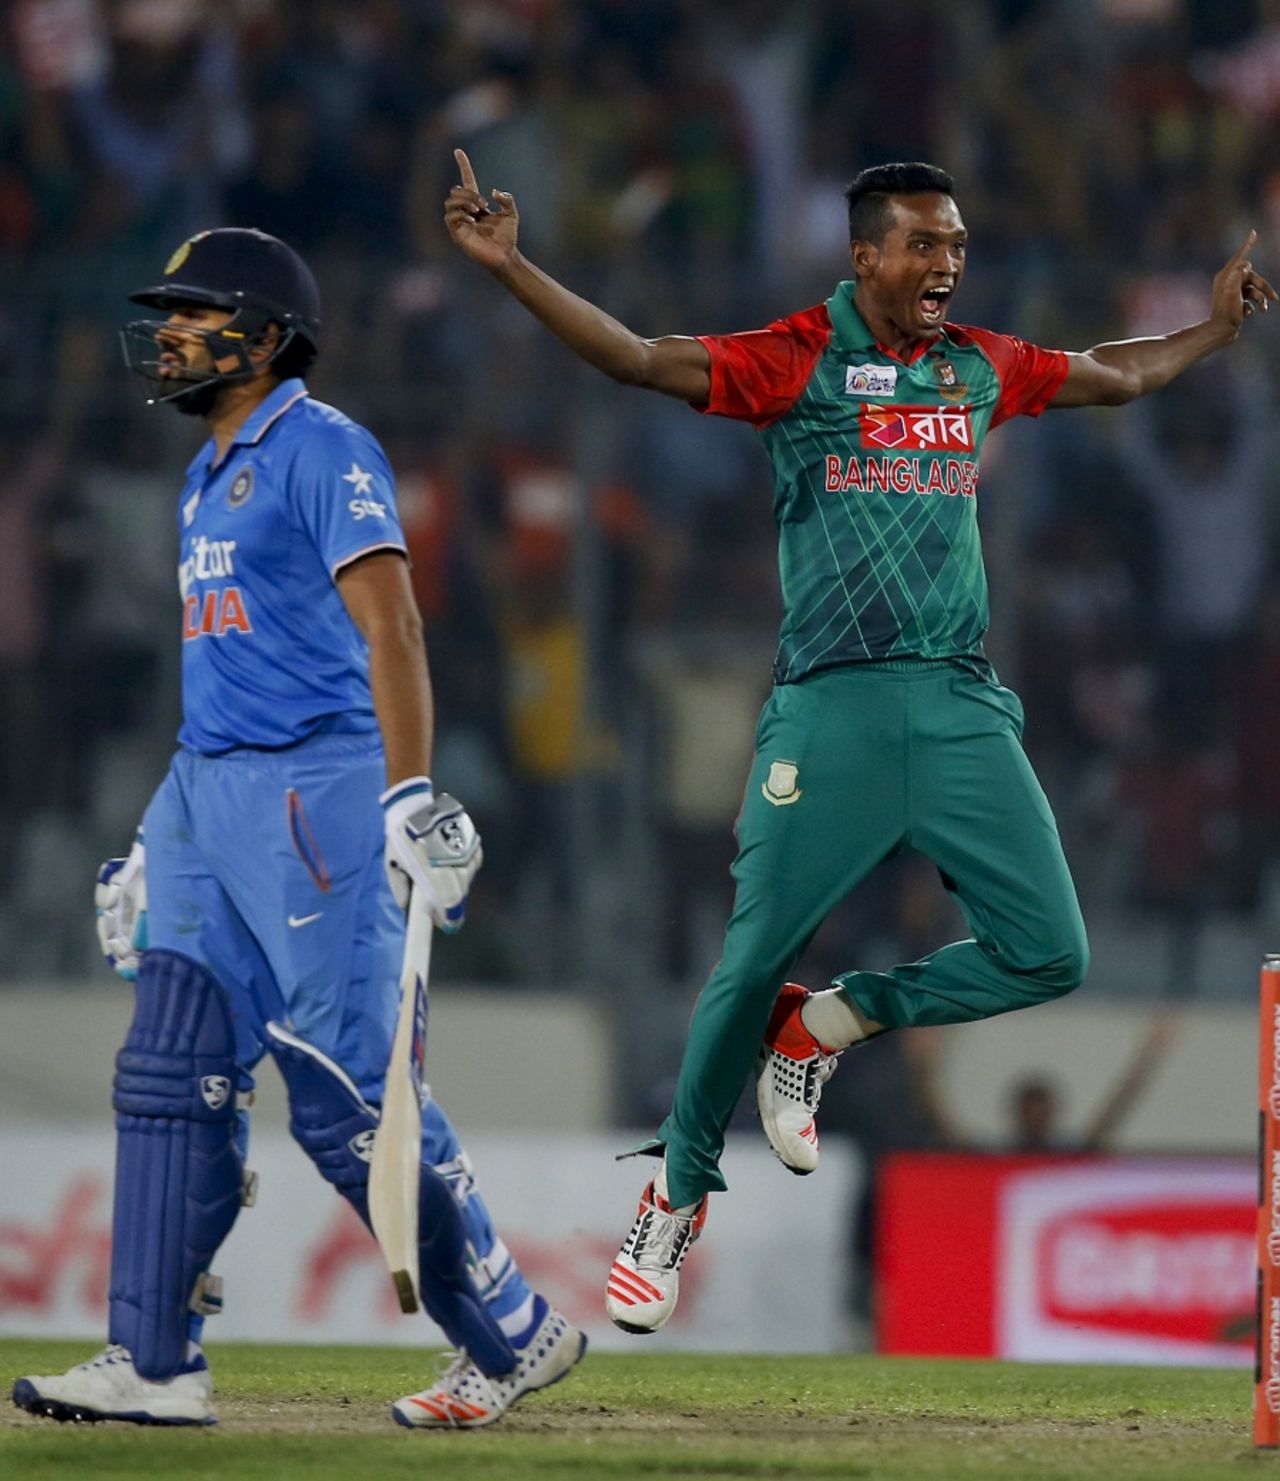 Al-Amin Hossain celebrates after dismissing Rohit Sharma,  Bangladesh v India, Asia Cup final, Mirpur, March 6, 2016 